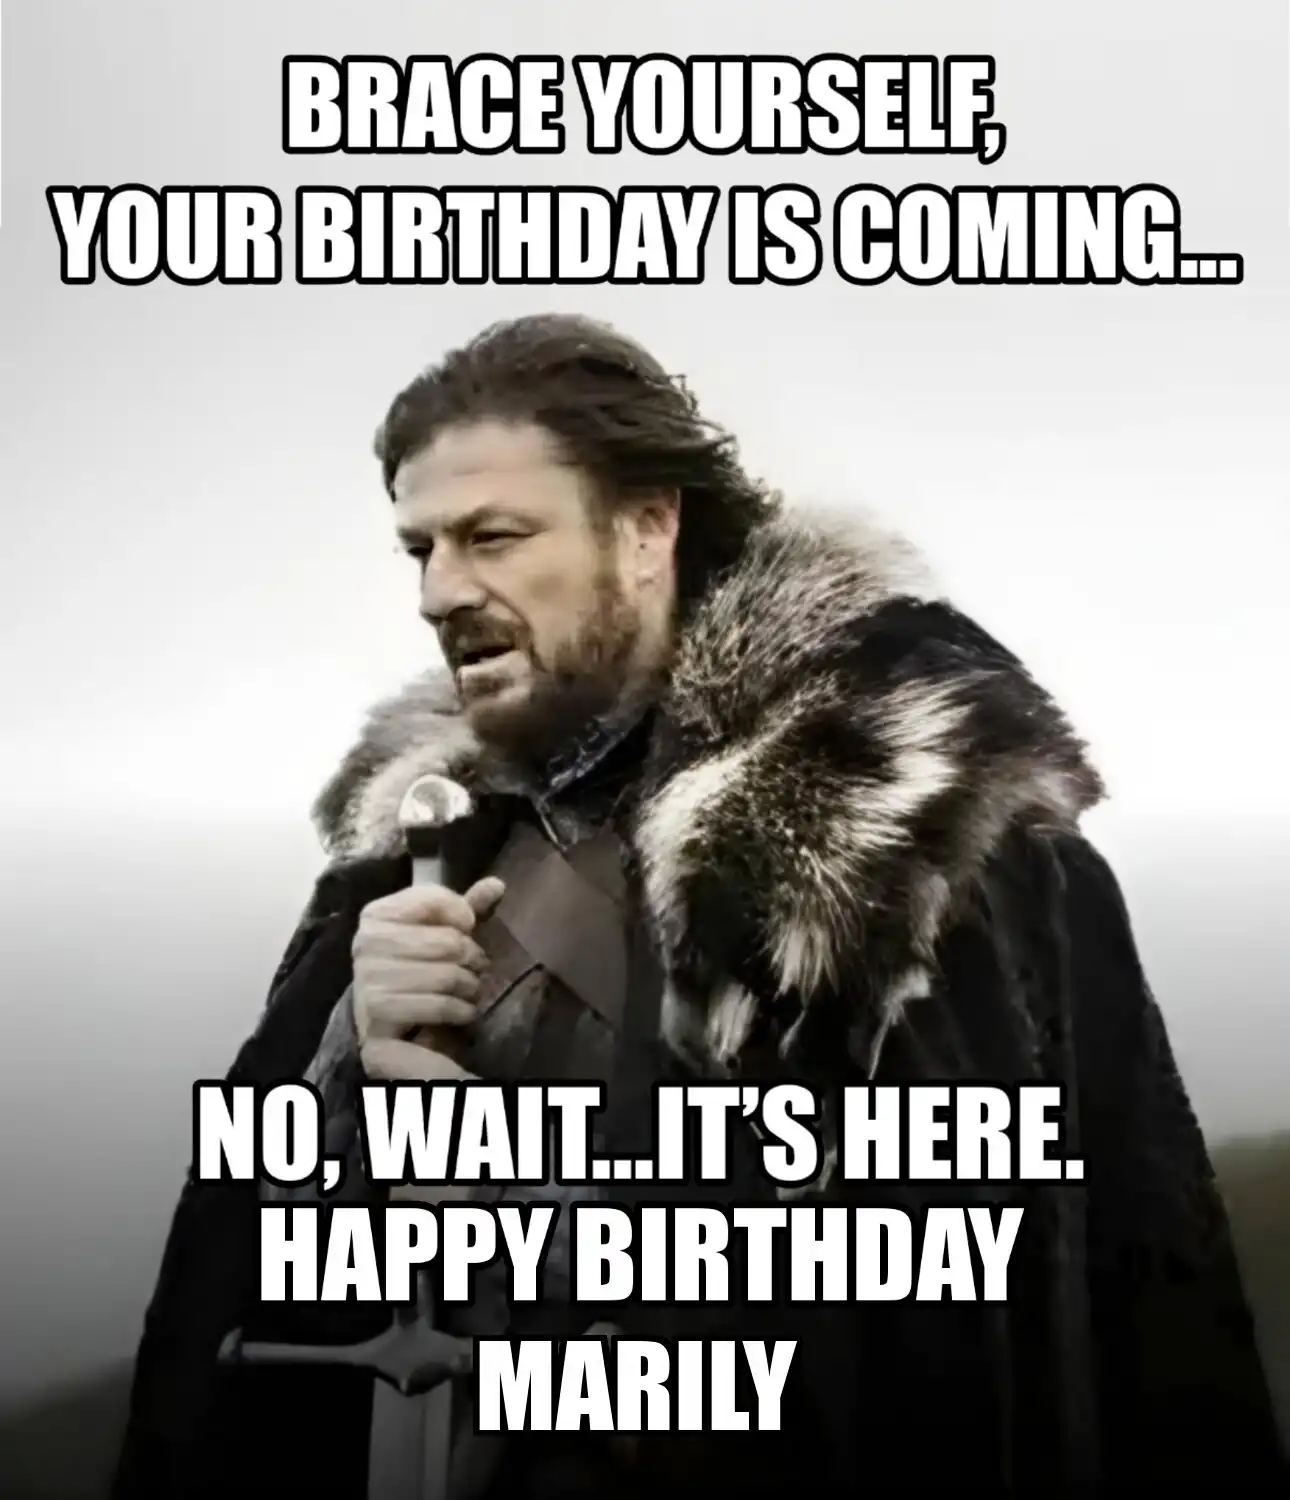 Happy Birthday Marily Brace Yourself Your Birthday Is Coming Meme